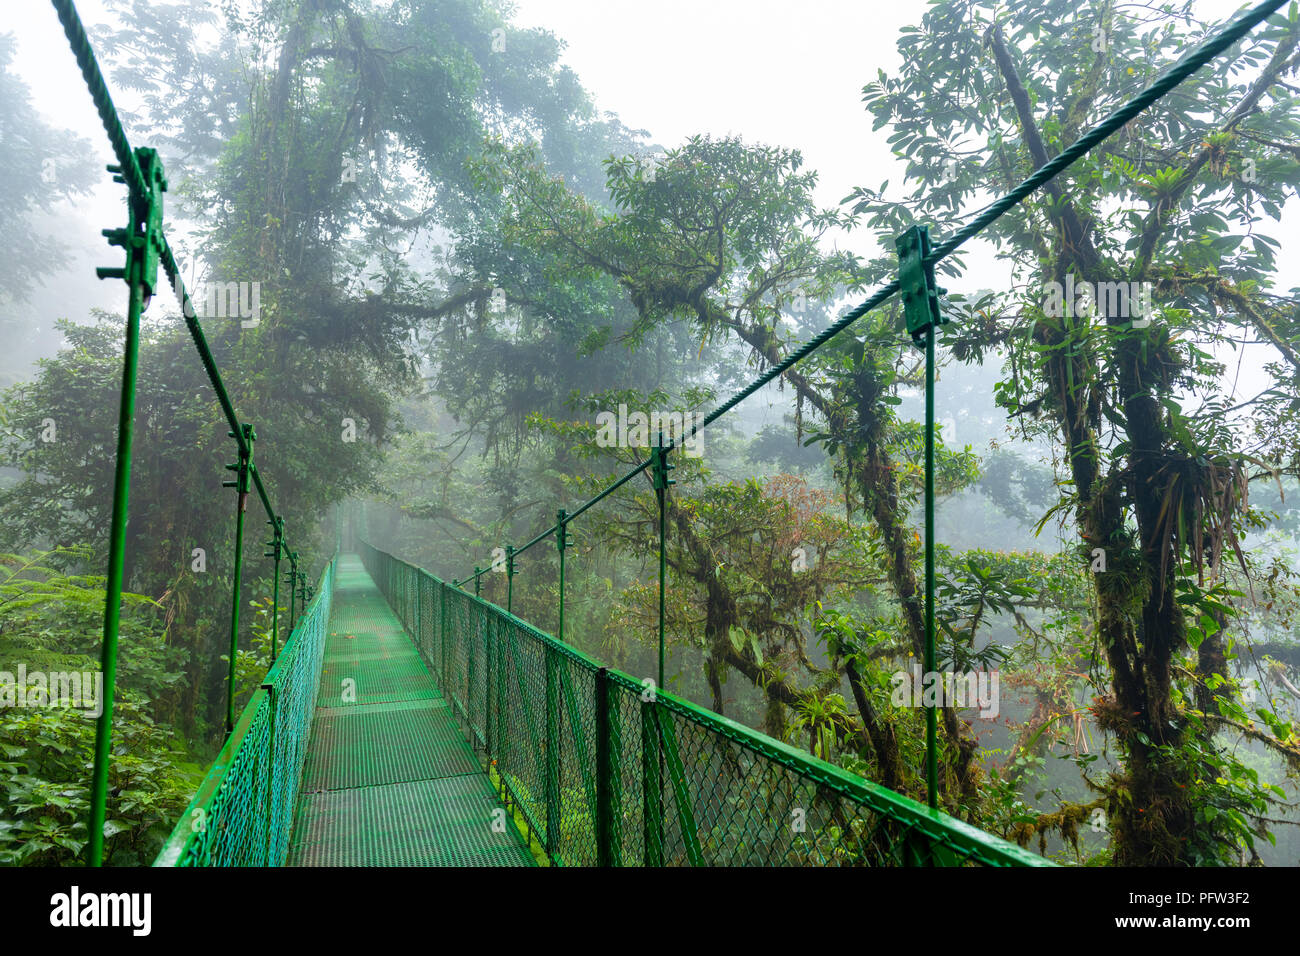 Hanging Bride in Costa Rica Cloudforest. Stock Photo